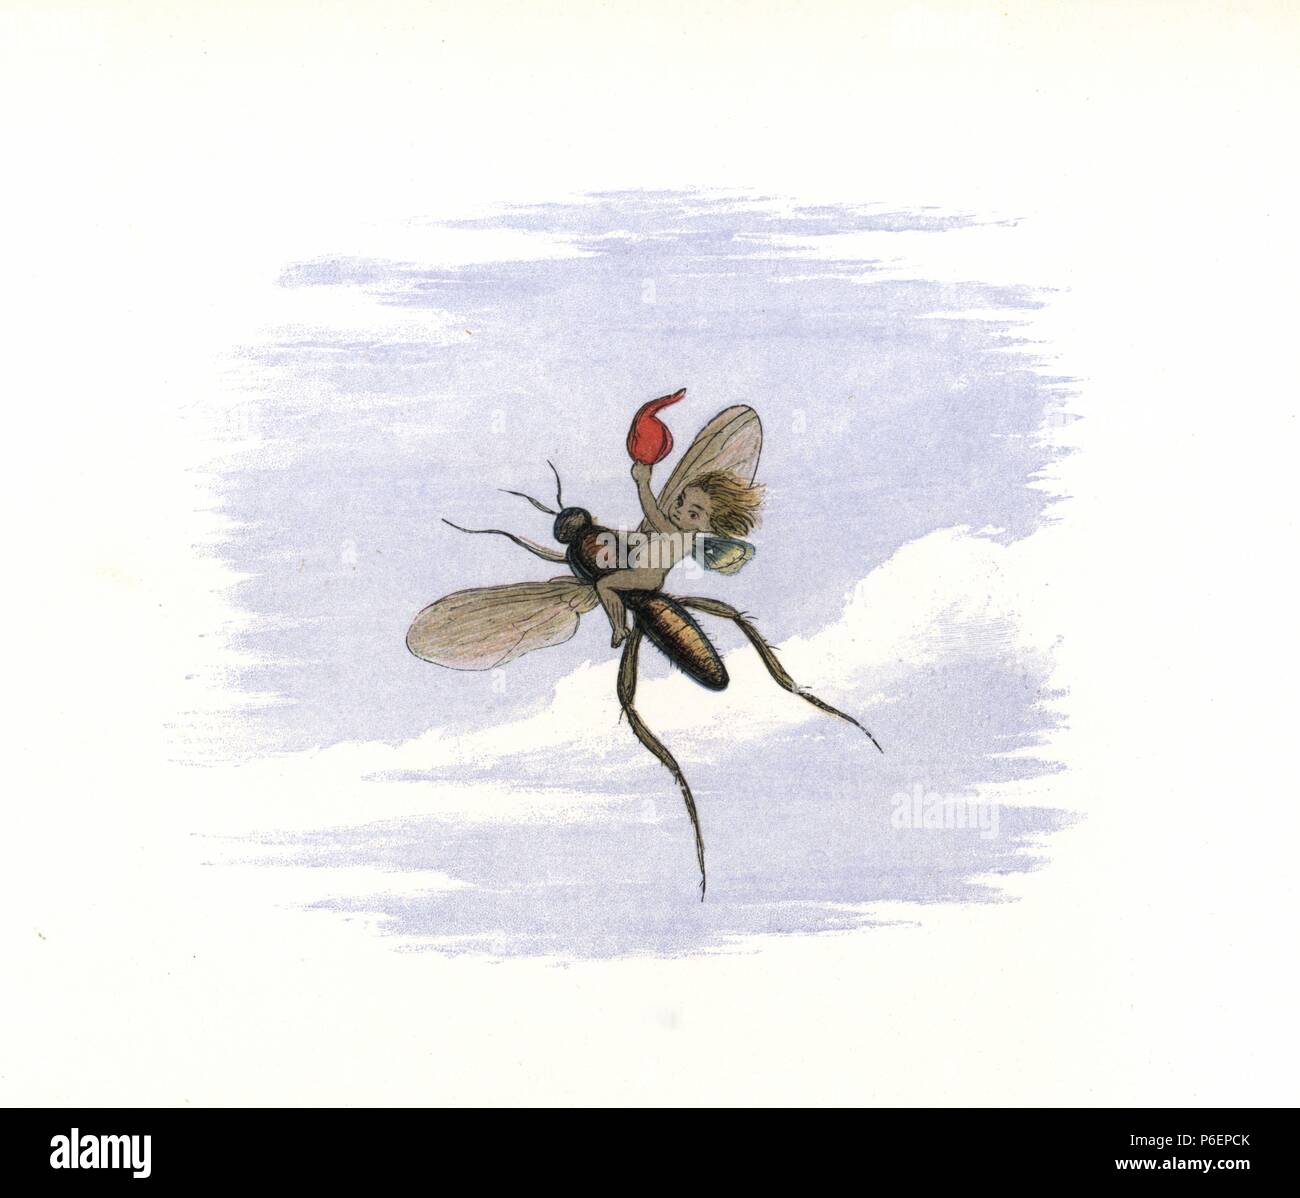 An elf flying away on an insect. Handcoloured woodblock print by Edmund Evans after an illustration by Richard Doyle from In Fairyland, a series of Pictures from the Elf World, Longman, London, 1870. Stock Photo